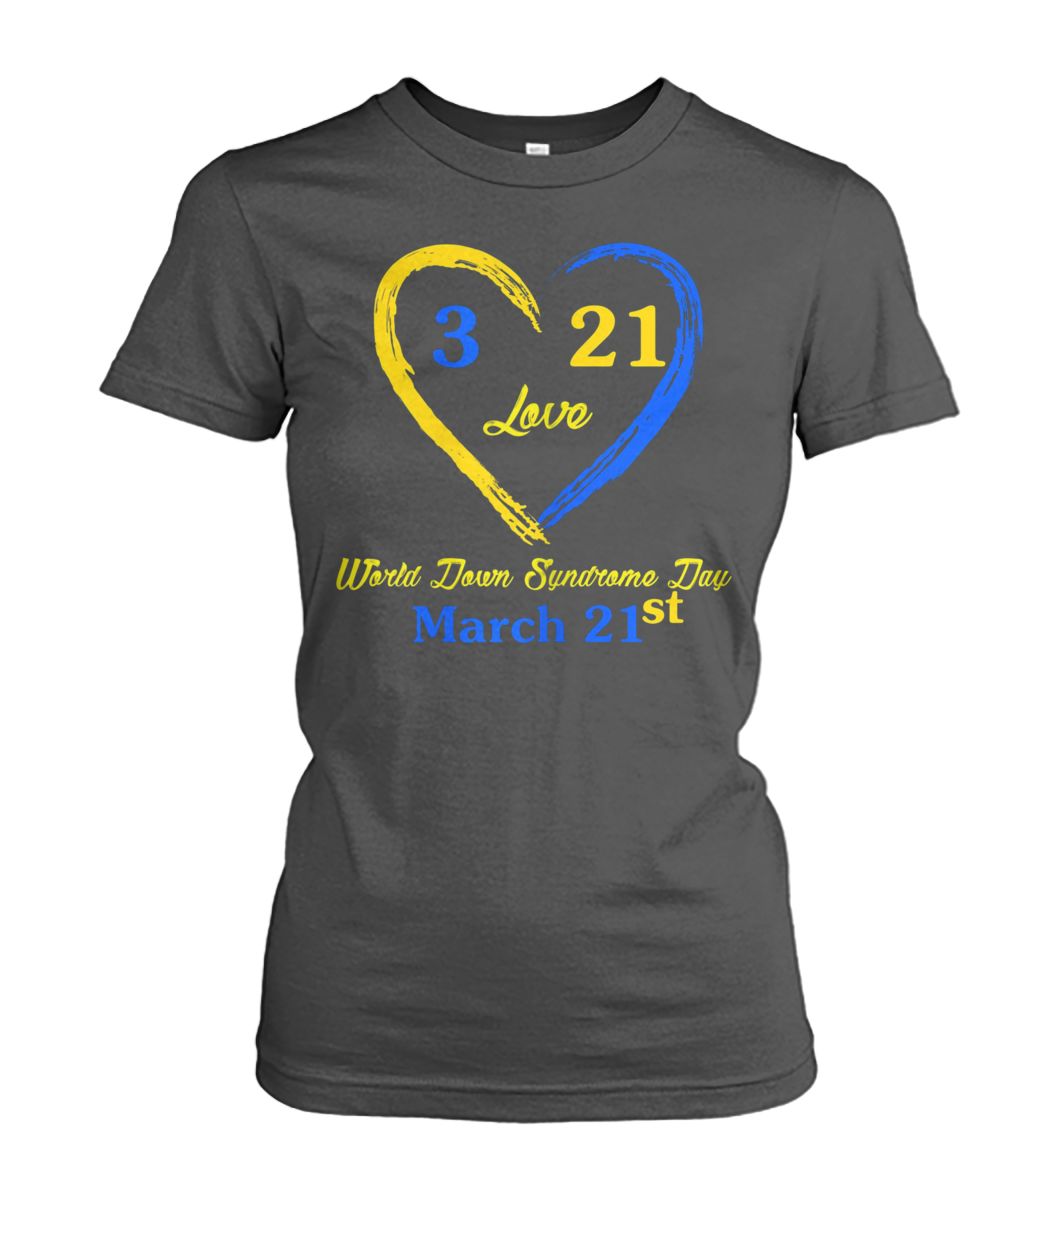 World down syndrome day awareness march 21 women's crew tee